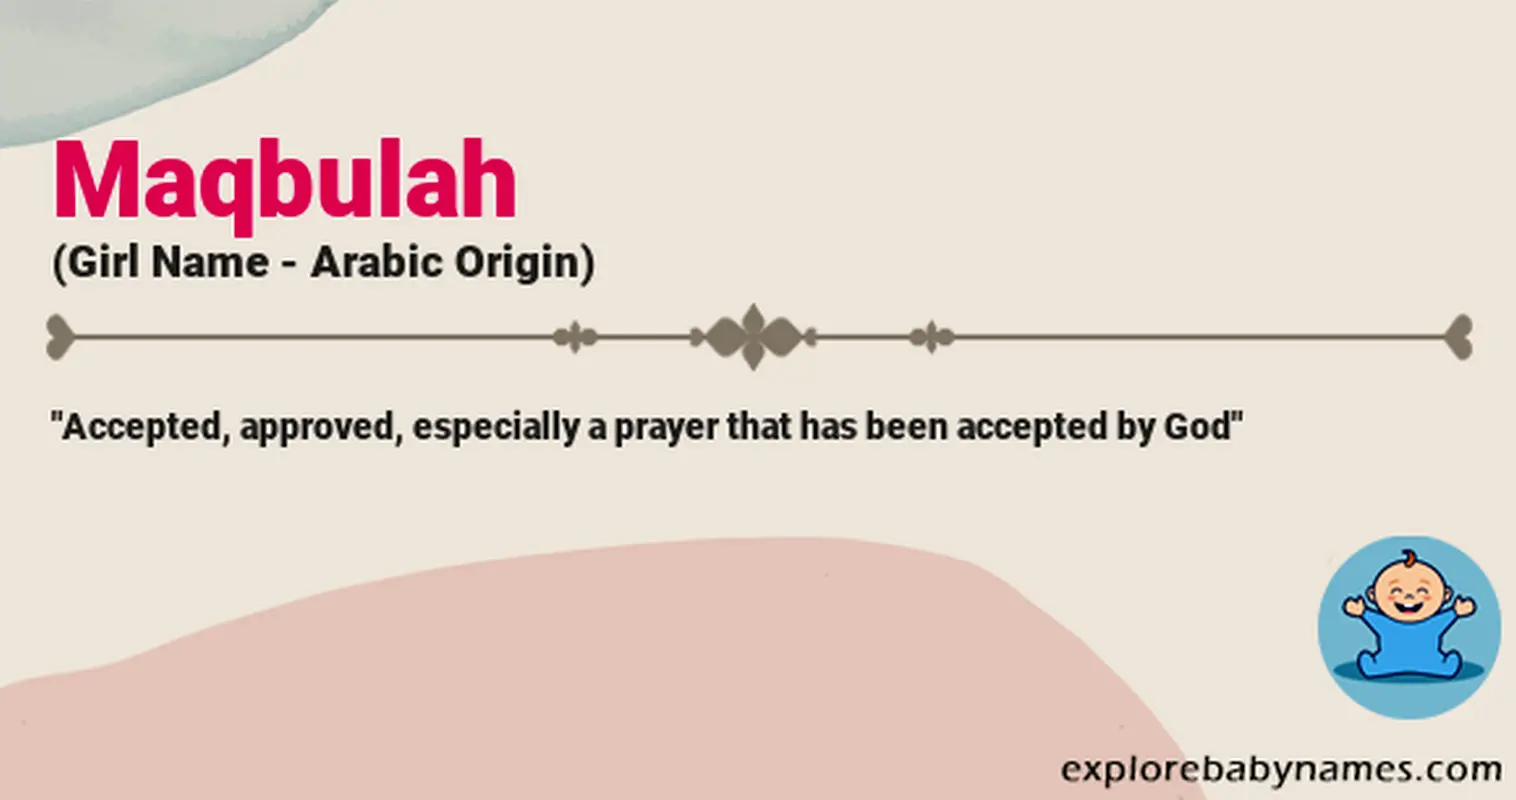 Meaning of Maqbulah